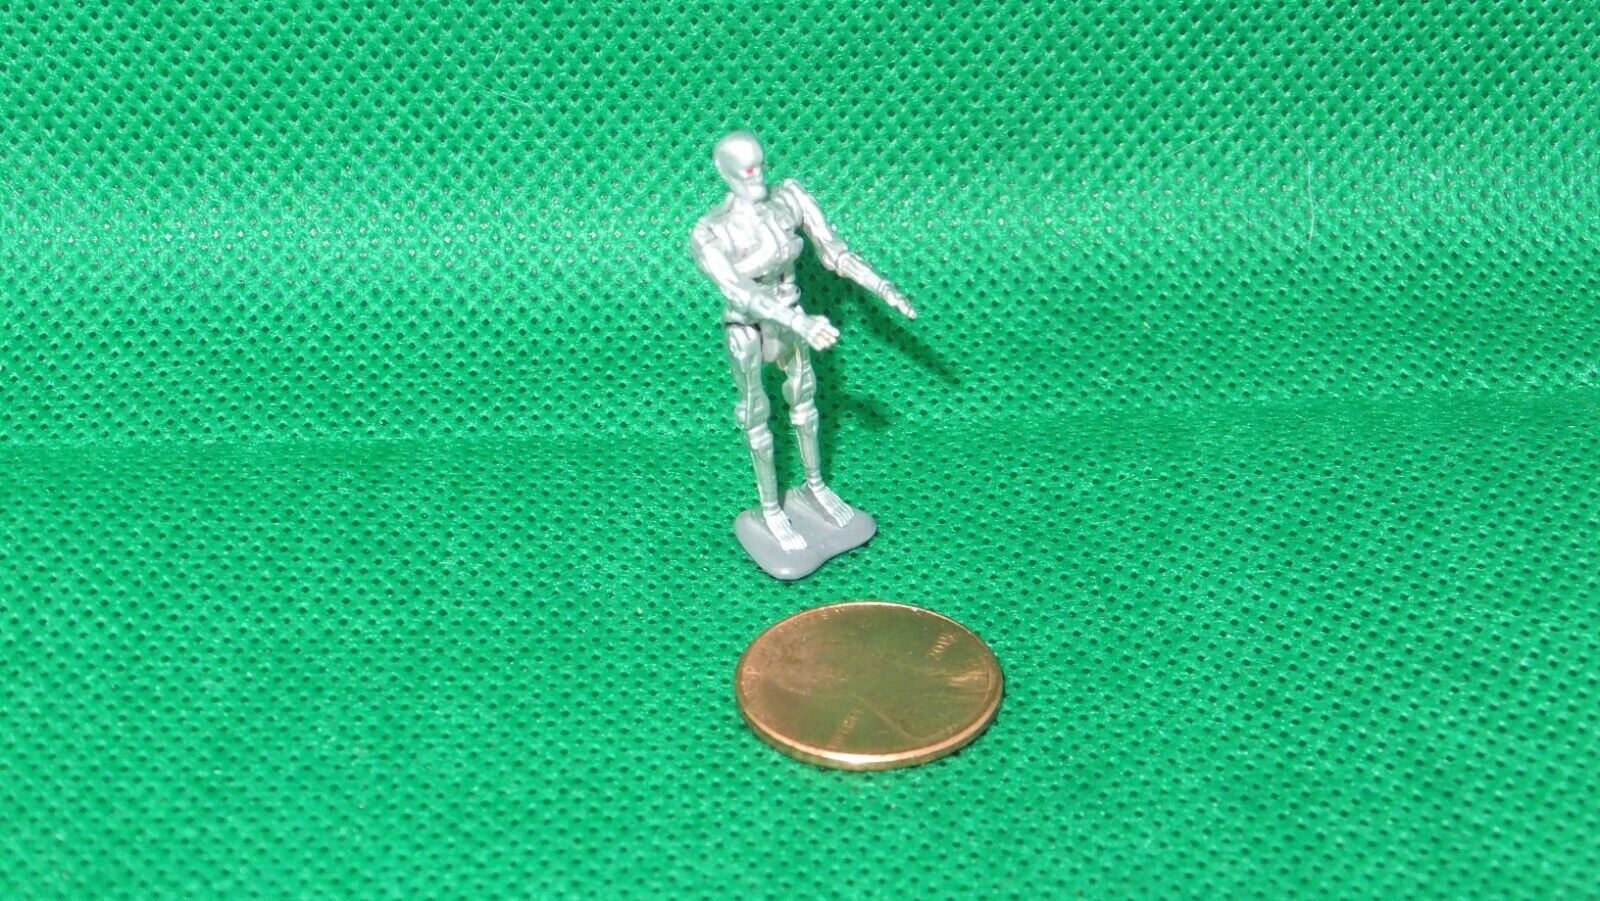 MICRO MACHINES TERMINATOR FIGURES FROM ALL SETS SARAH JOHN CONNOR T800 T1000